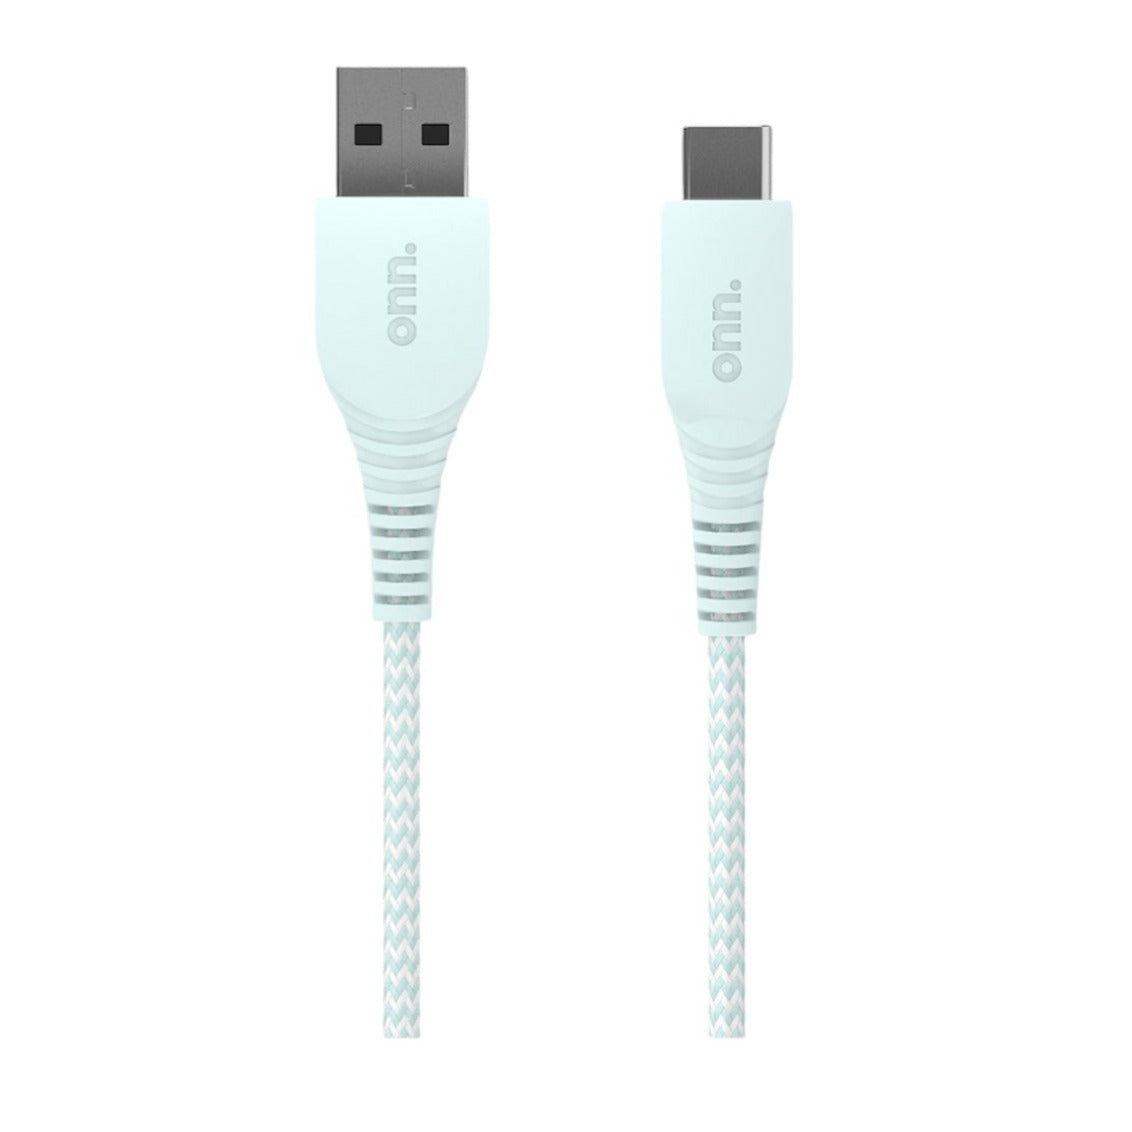 Connect Onn USB-C To USB Cable 6 Ft